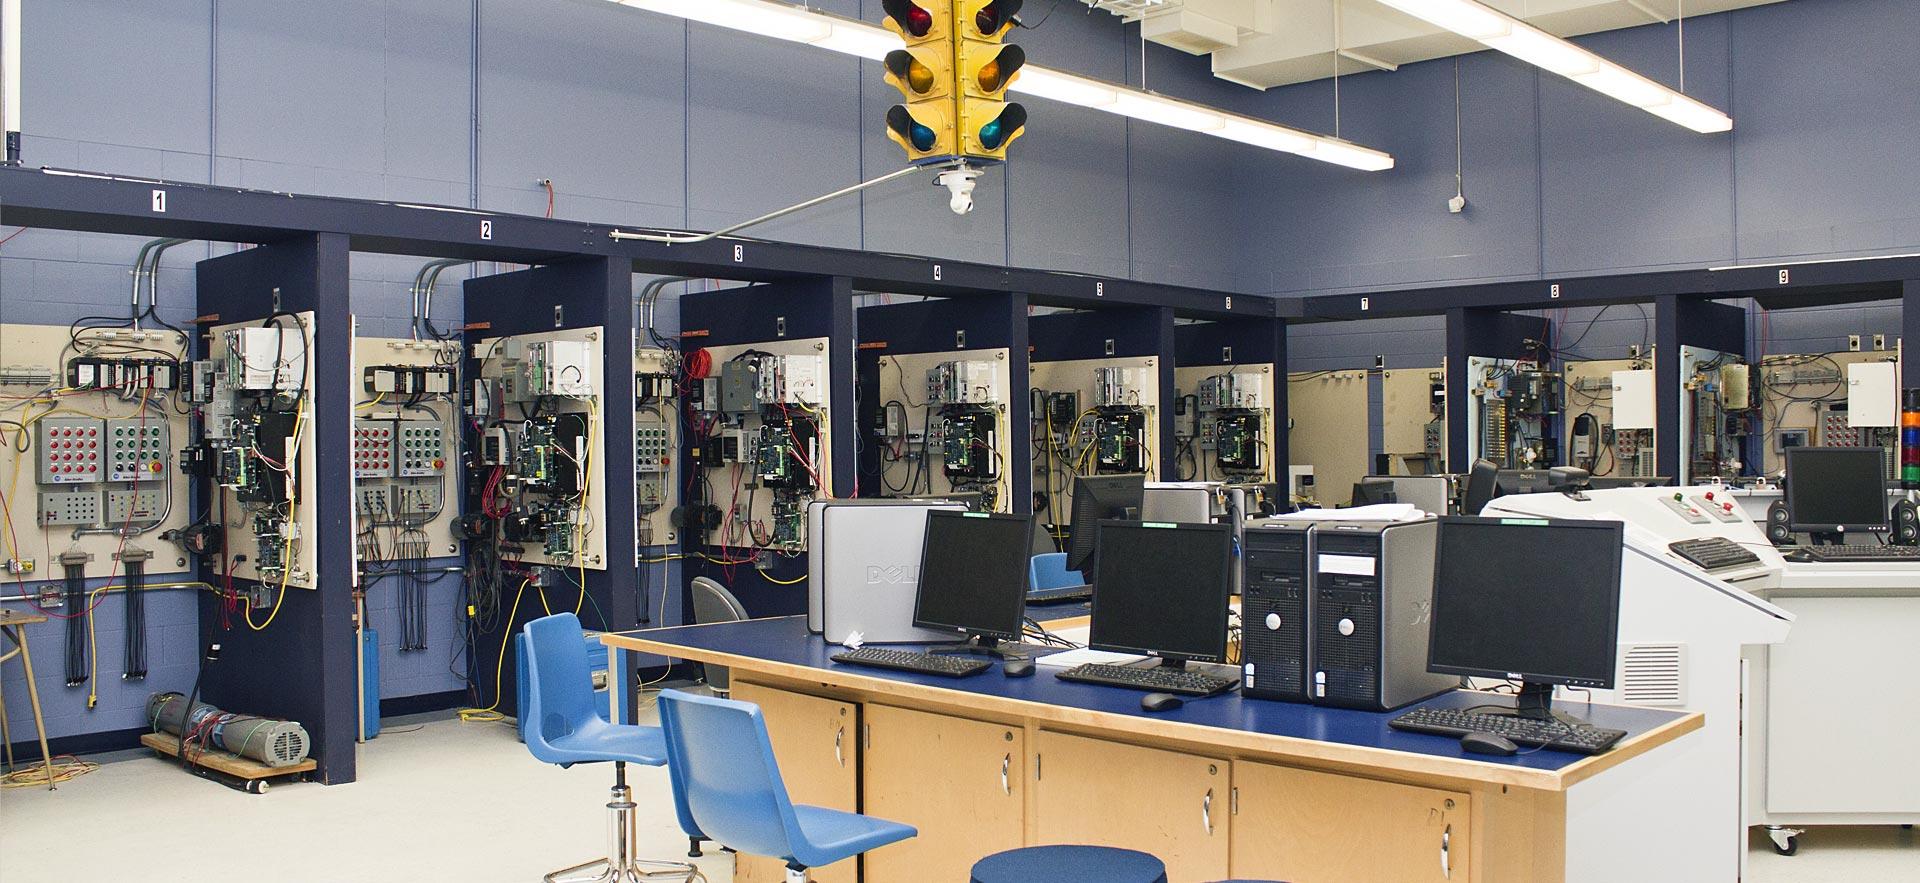 Interior of one of the Electrical Engineering classrooms.